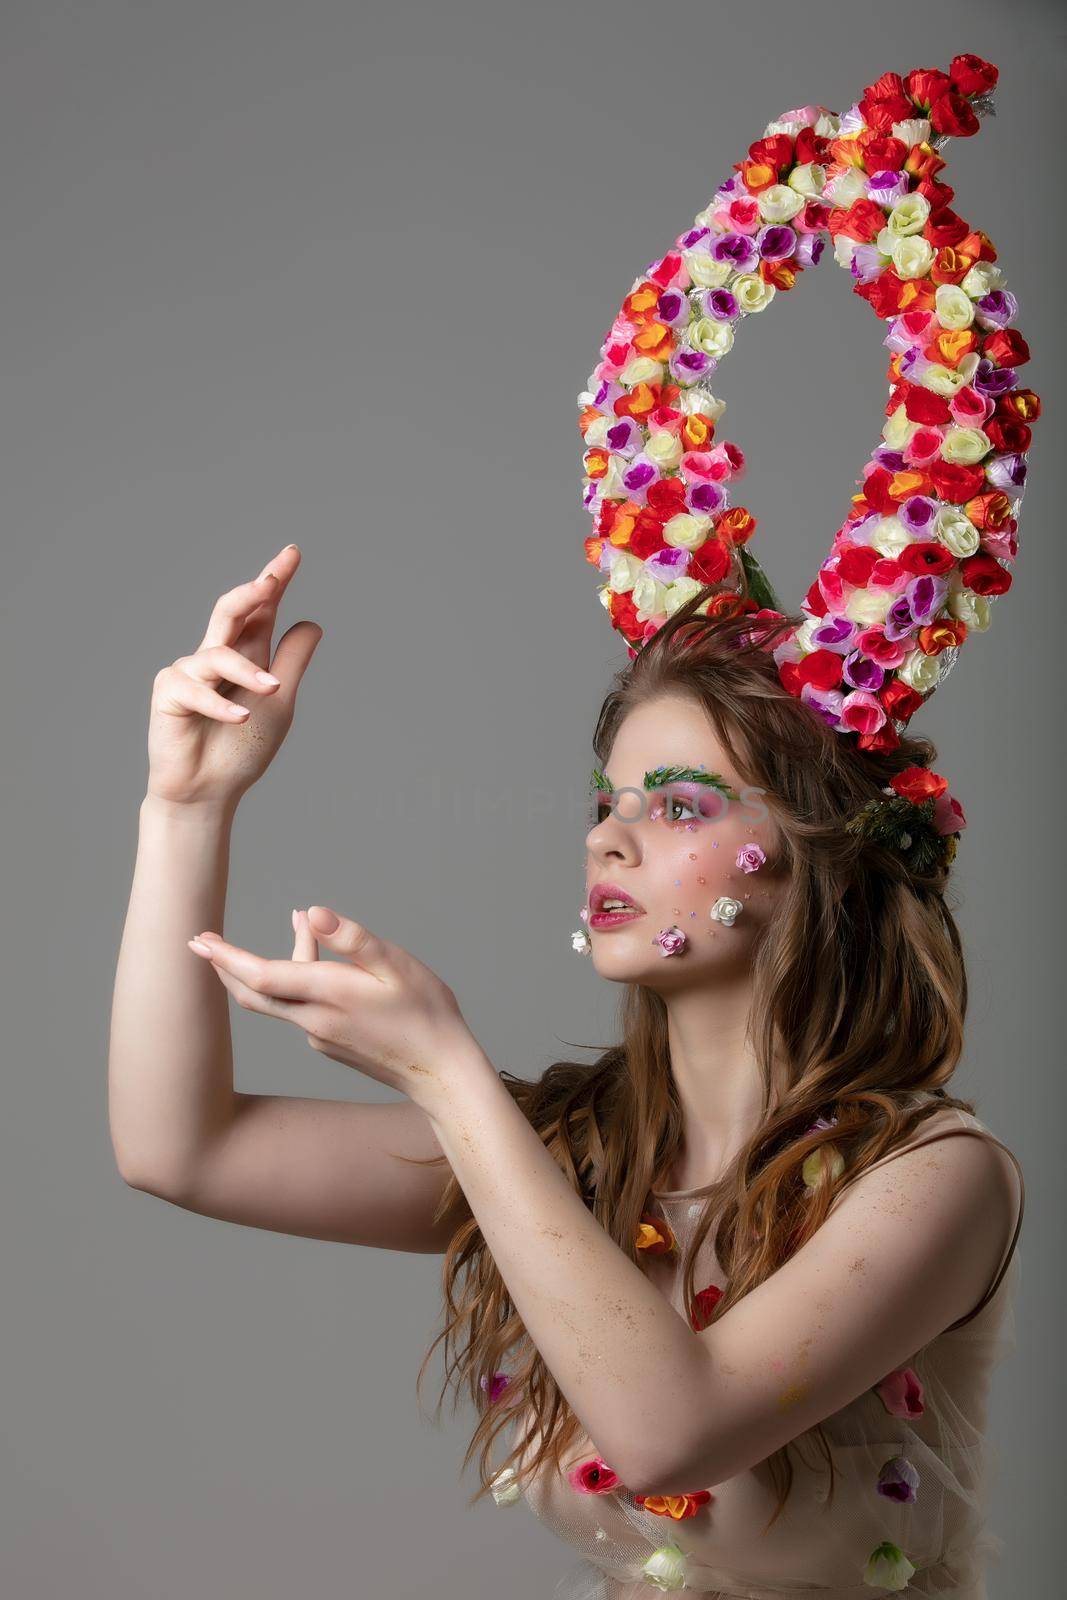 Fairytale girl with floral horns and fantastic make-up. Malifiscent. Spring or summer beauty.